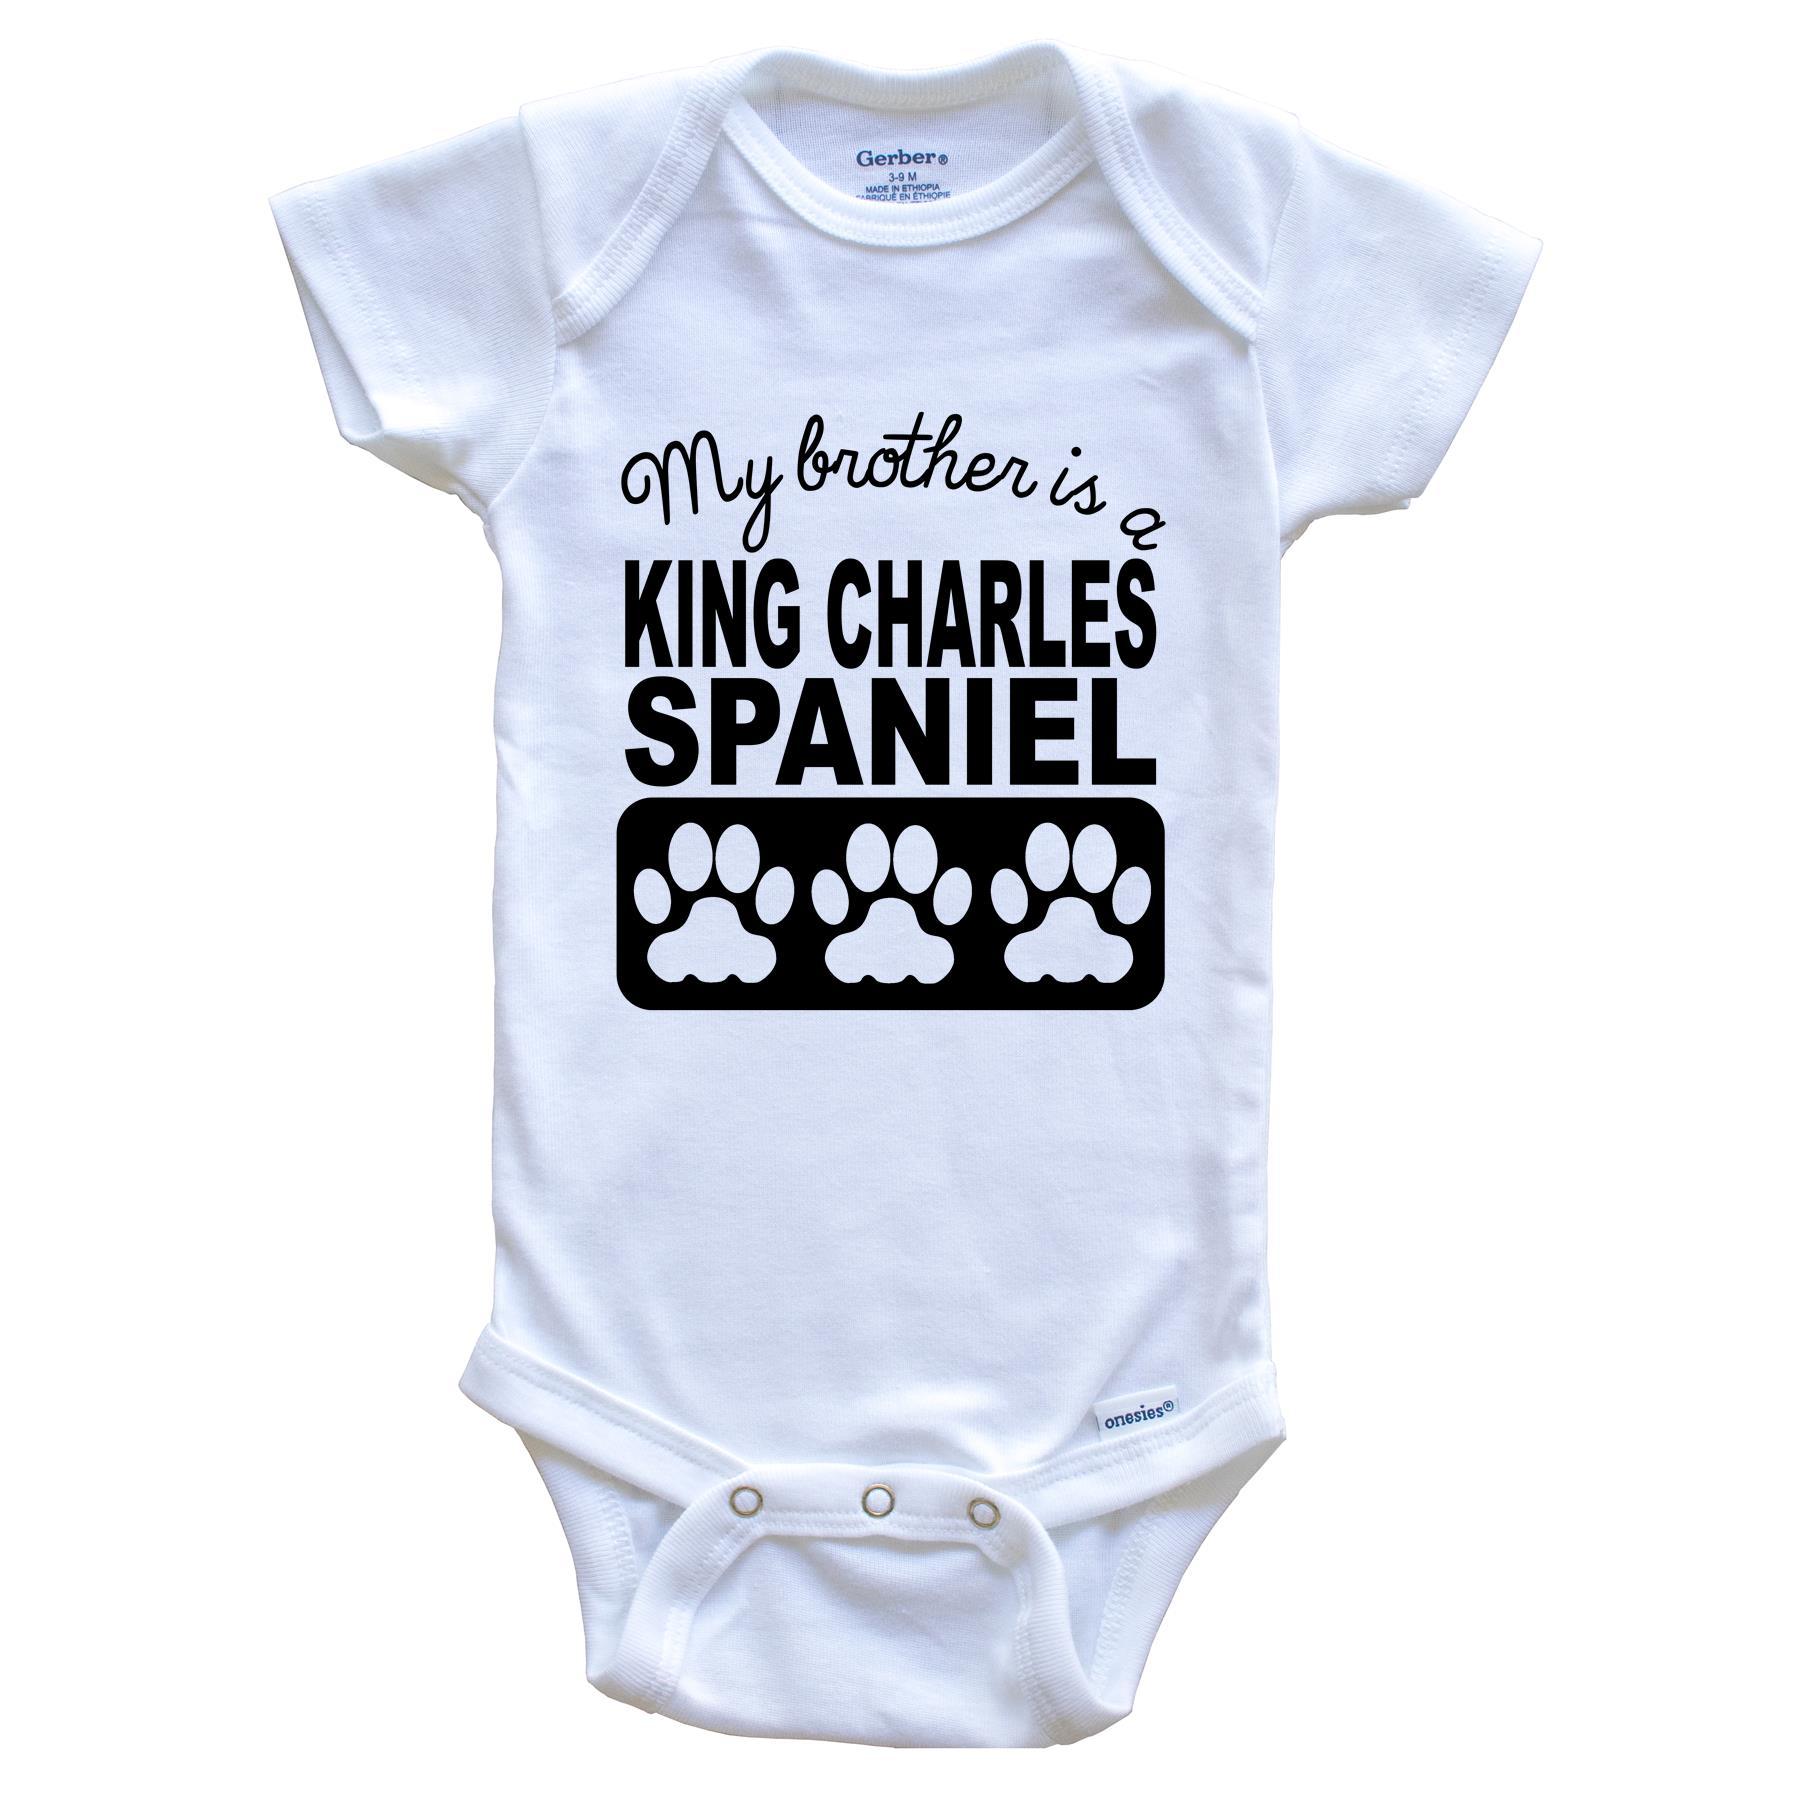 My Brother Is A King Charles Spaniel Baby Onesie